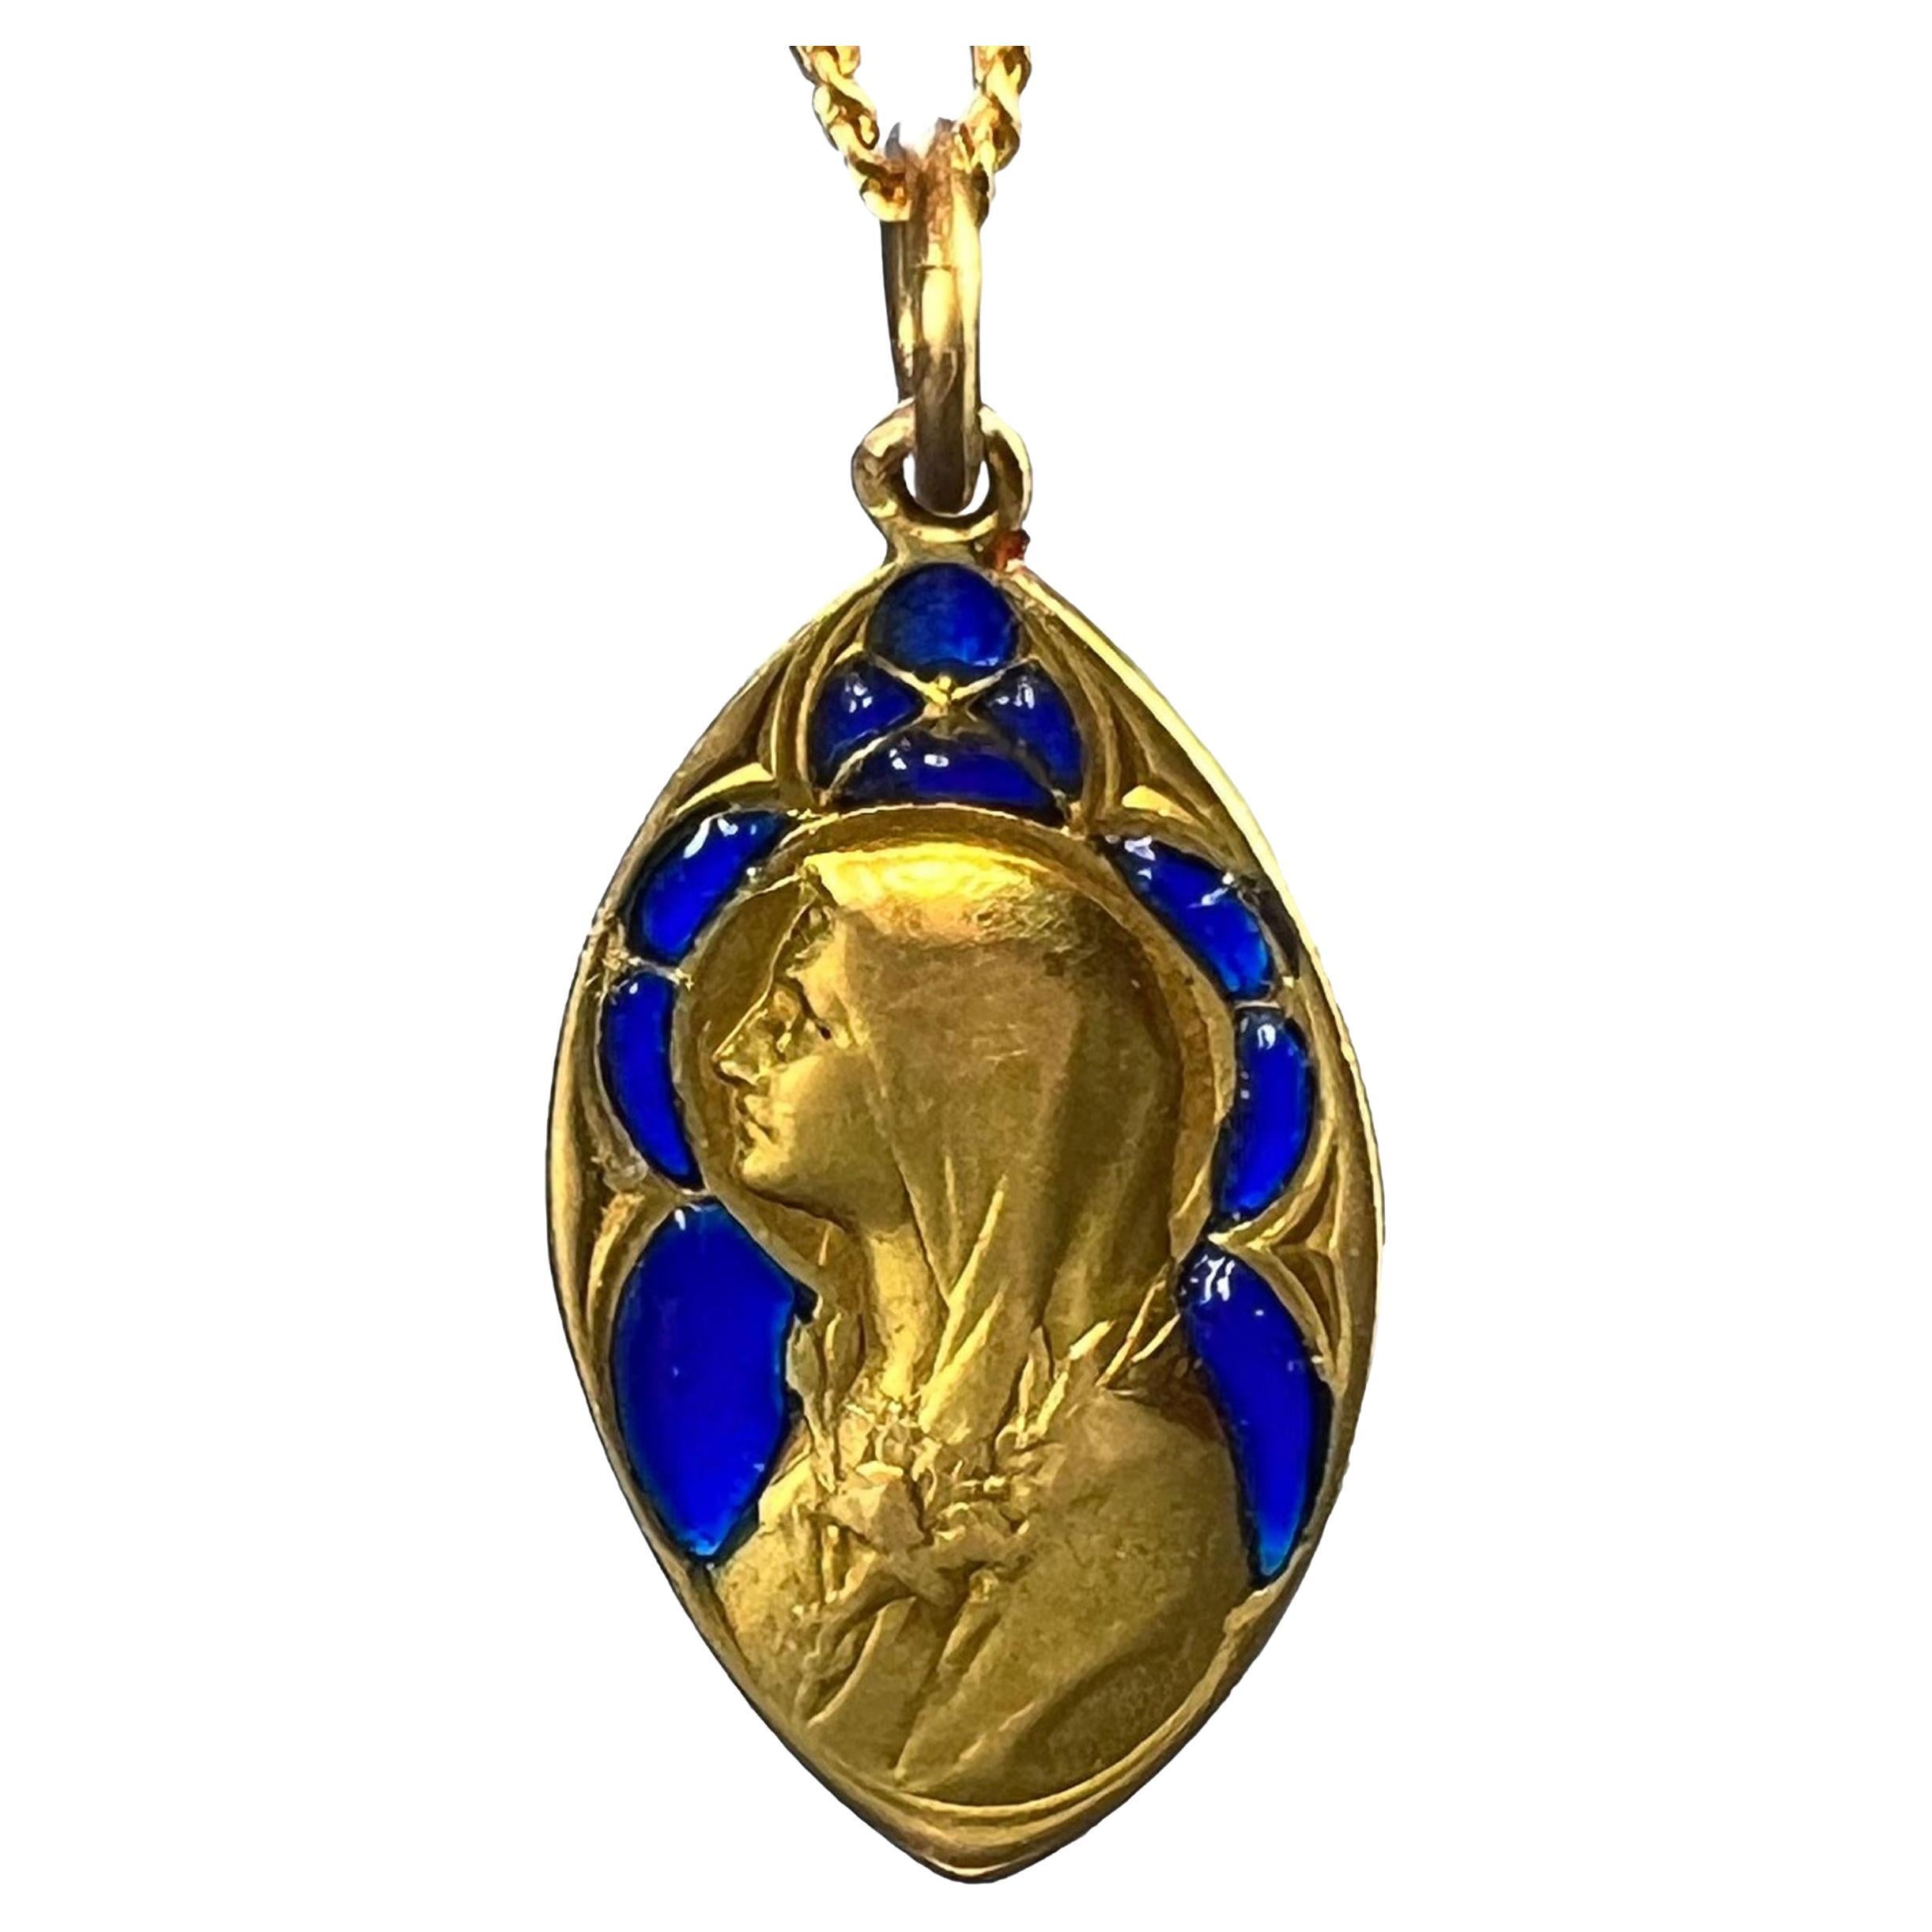 French Guilbert Virgin Mary Plique A Jour Enamel 18K Yellow Gold Pendant Medal For Sale